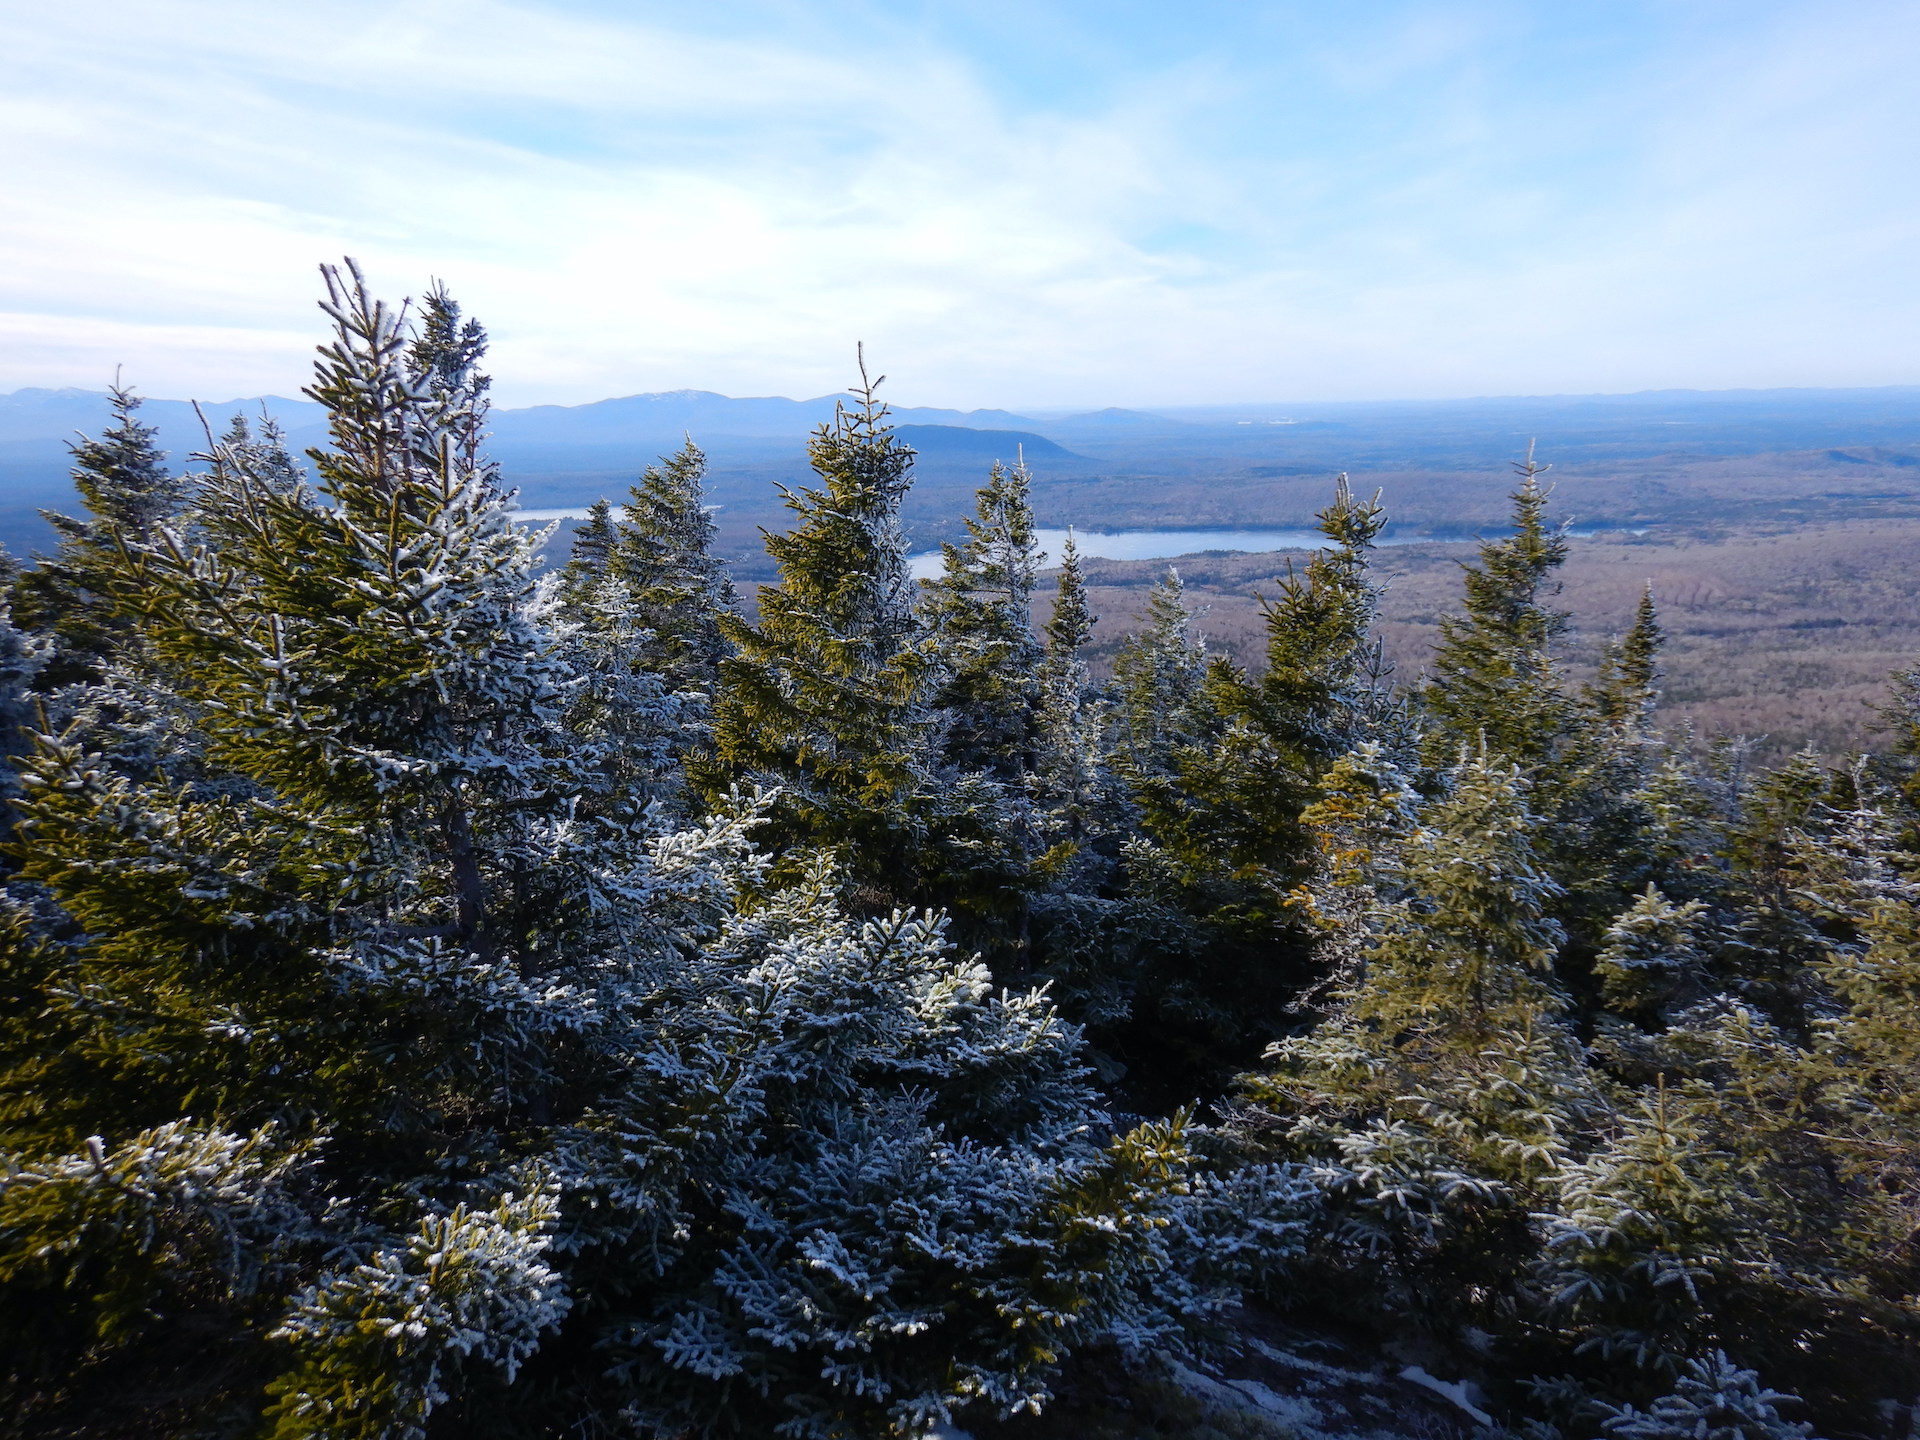 View of forested landscape. Lightly frosted spruce and fir fill the foreground. A lake is visible at center in the lower elevation forest. A ridge of mountains forms the horizon at left center.